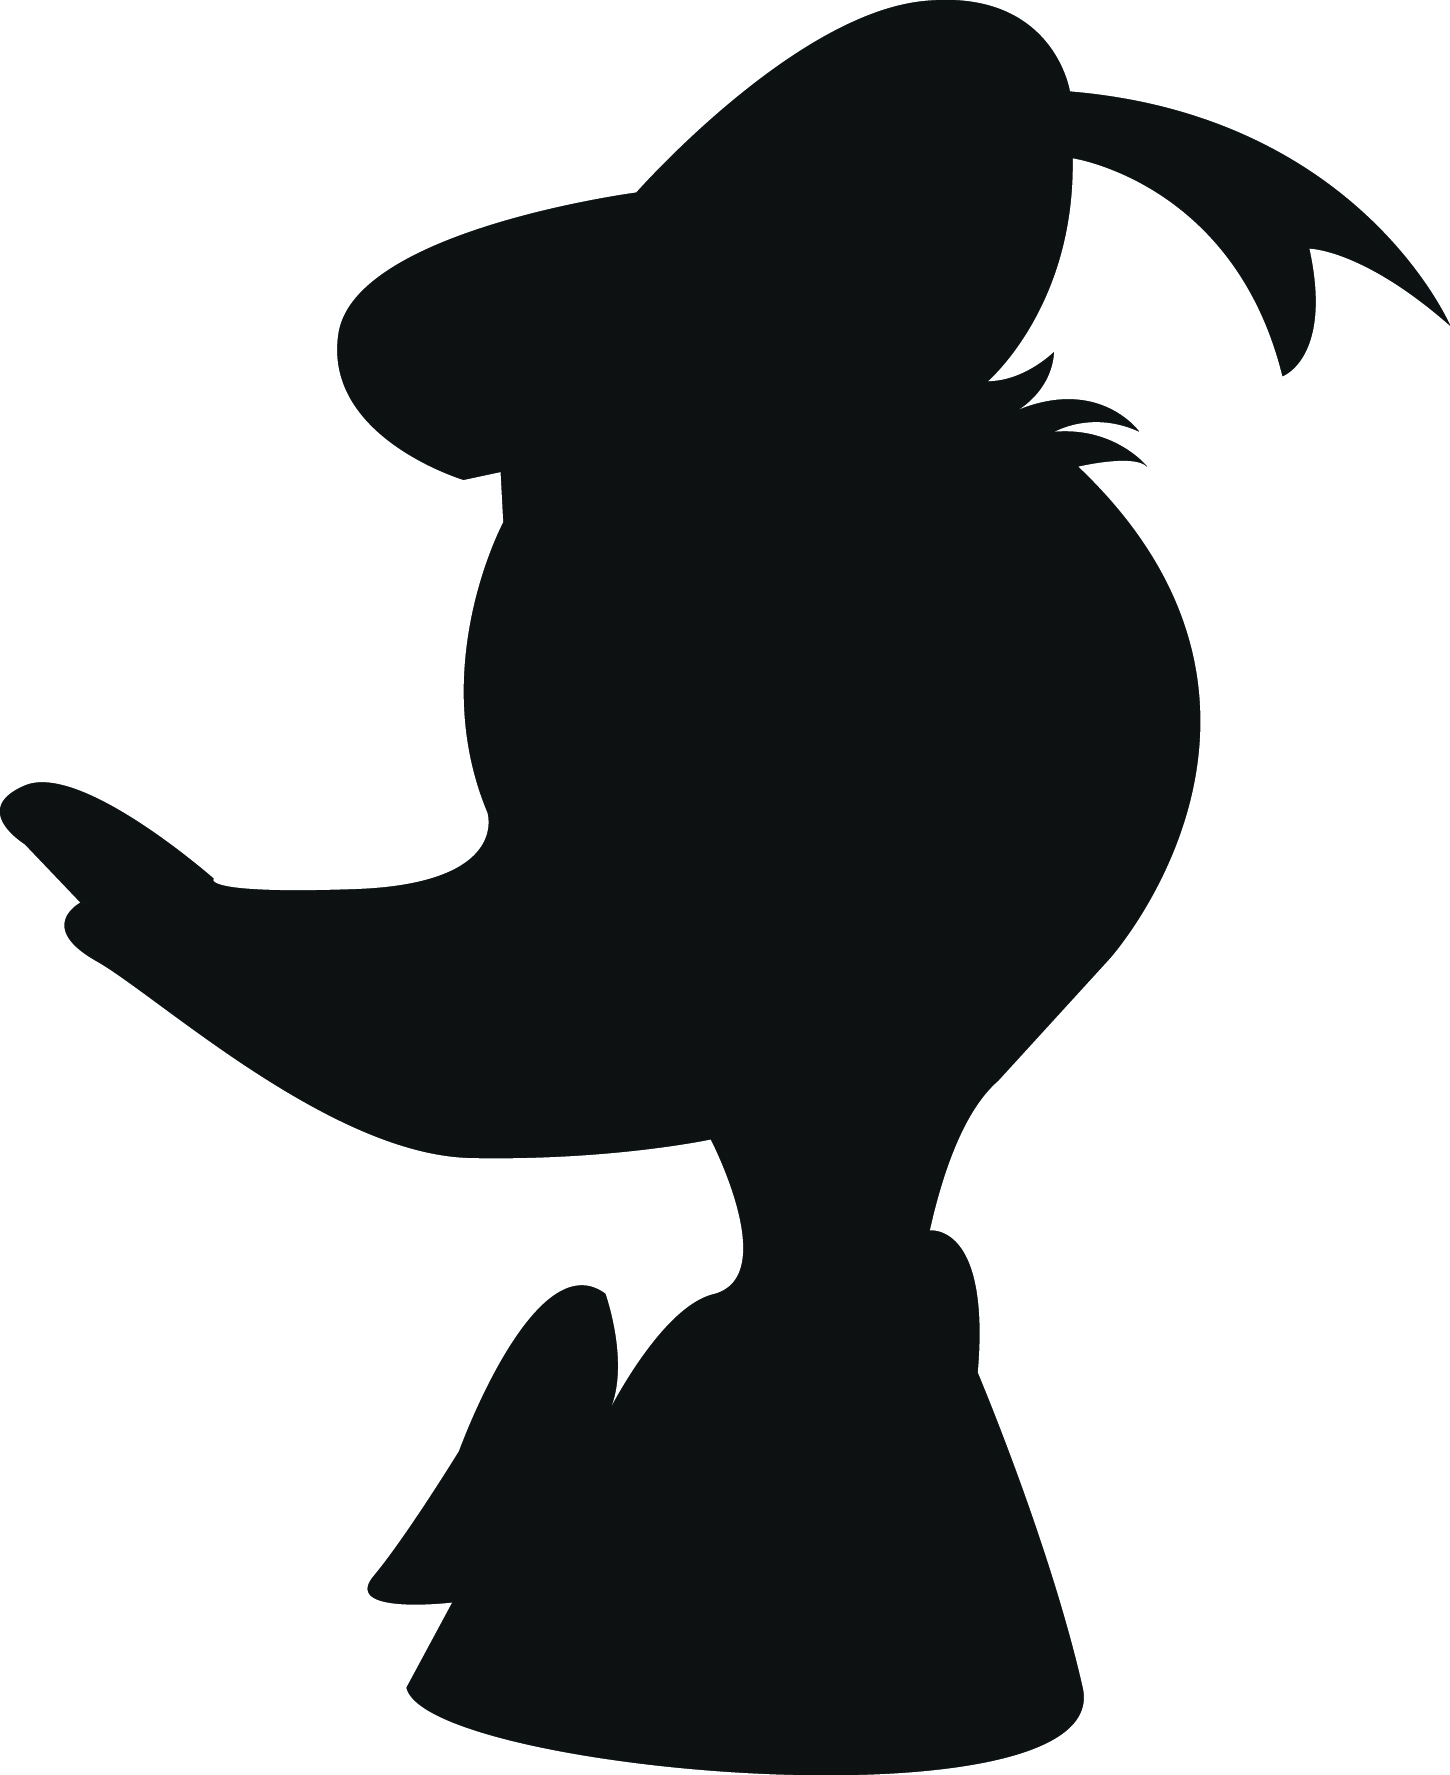 9 Best Images of Disney Printable Silhouettes - Disney Princess Silhouette Printables, Printable